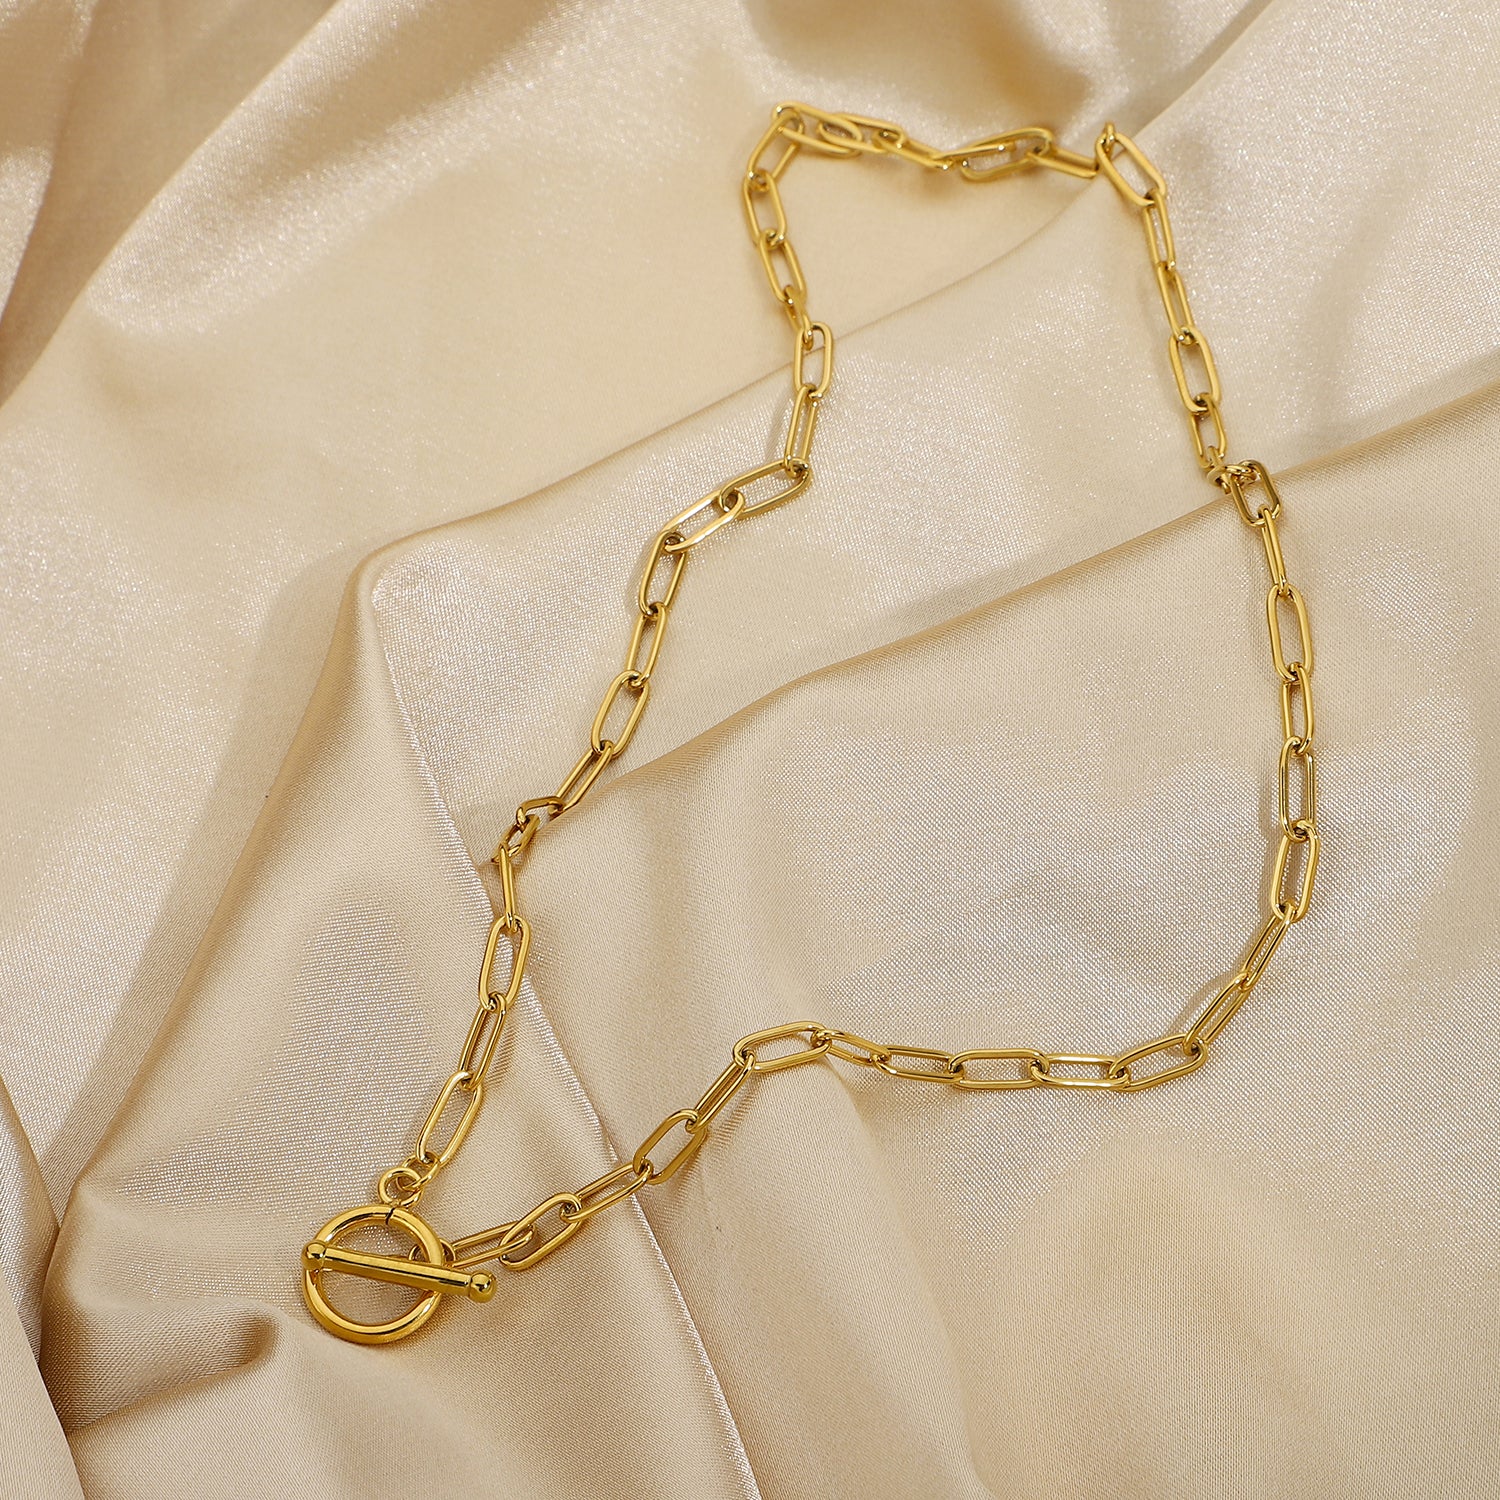 Best Aesthetic Gold Rope Chain Necklace Jewelry Gift